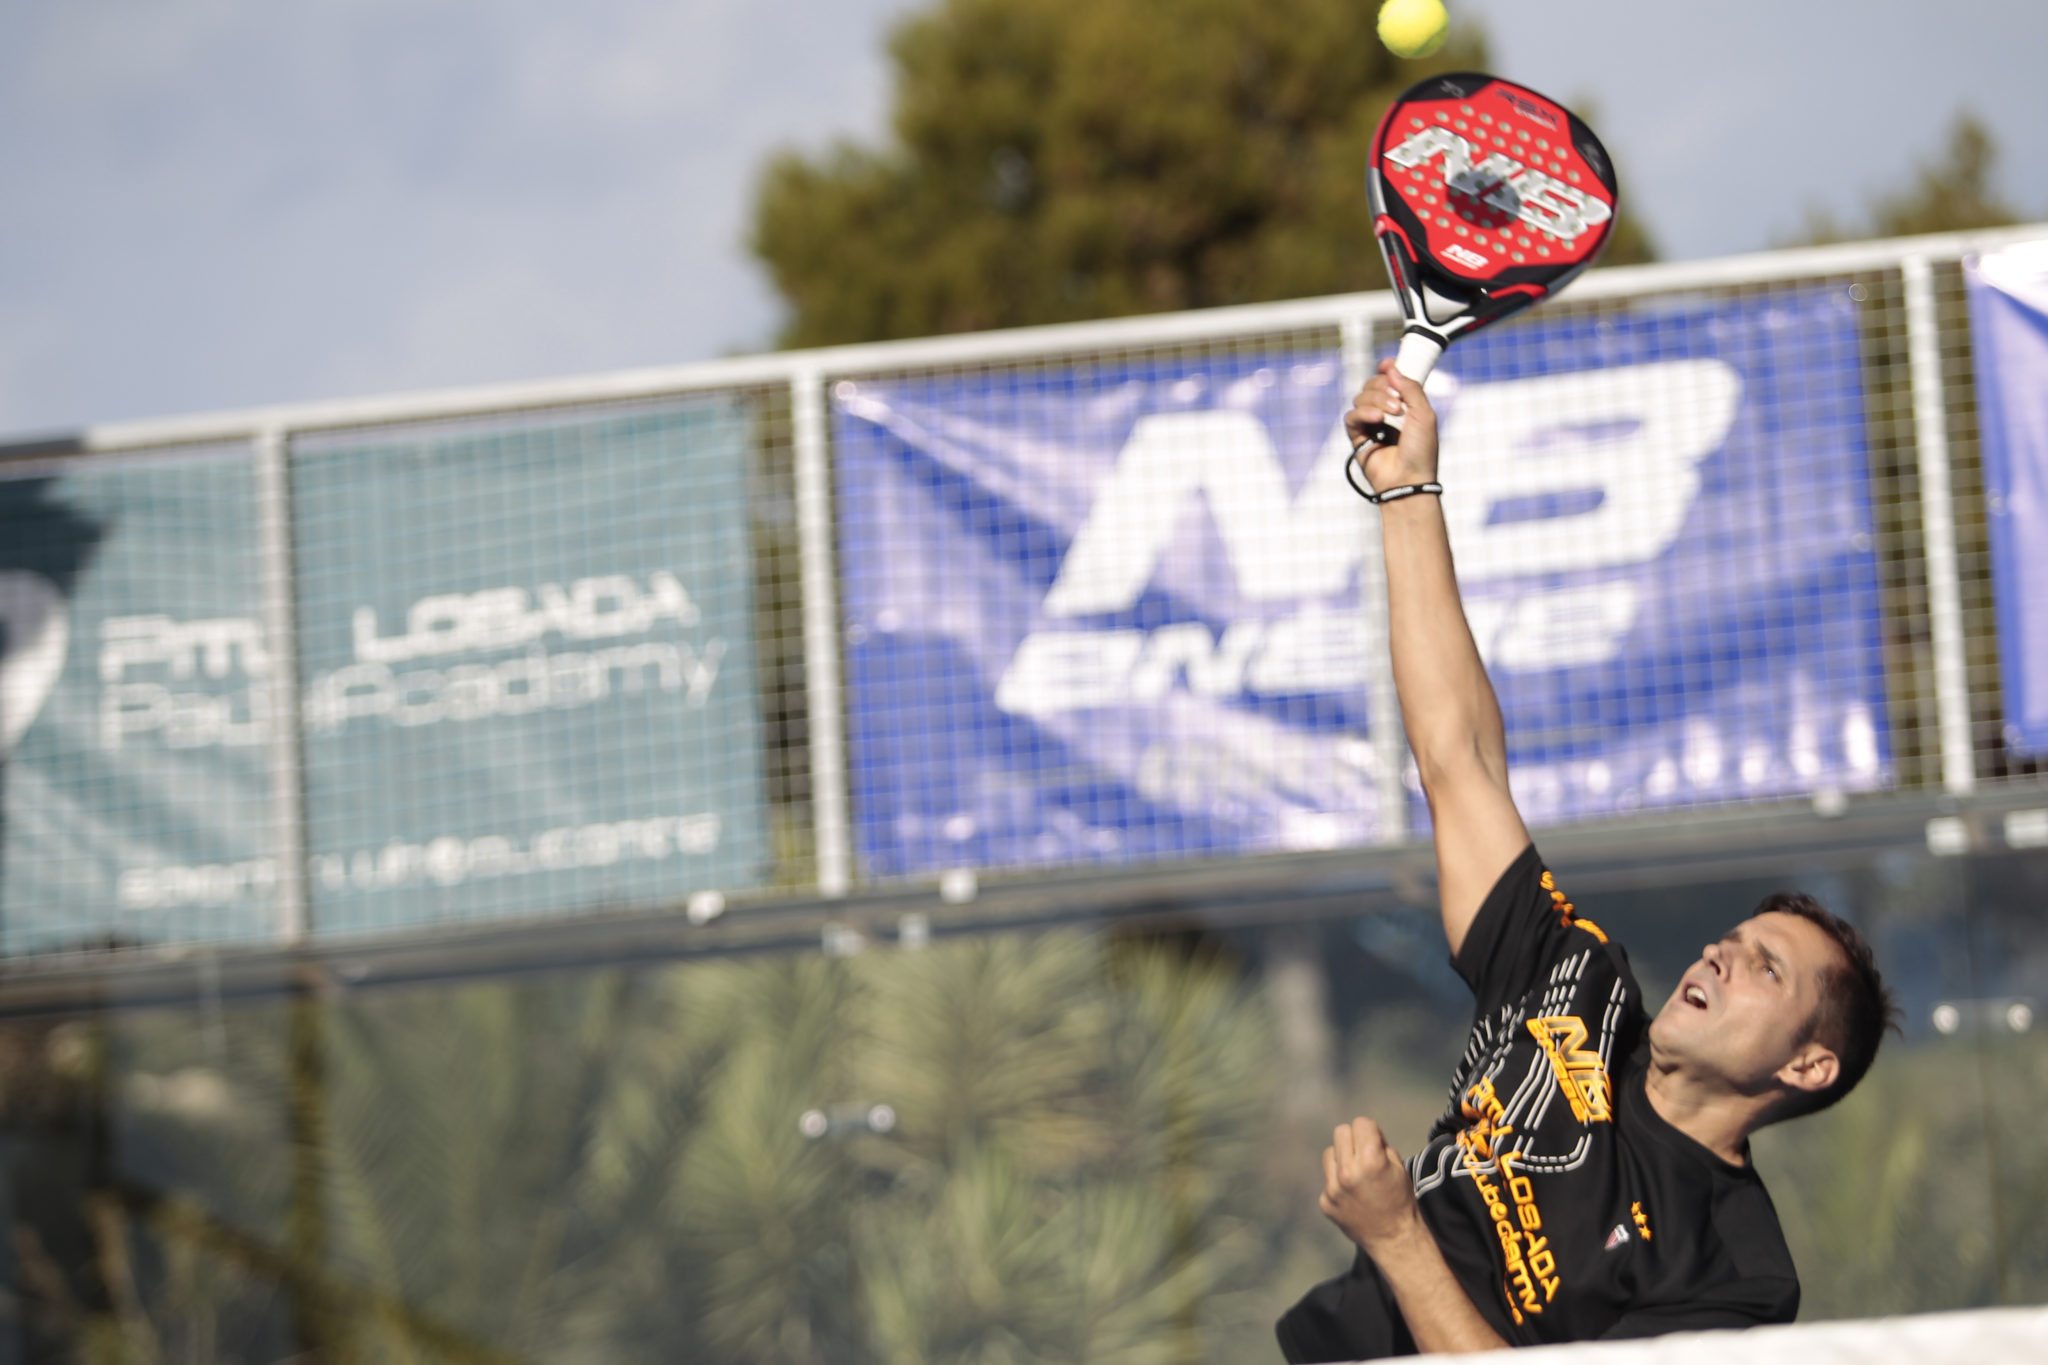 How to earn a point at padel ?